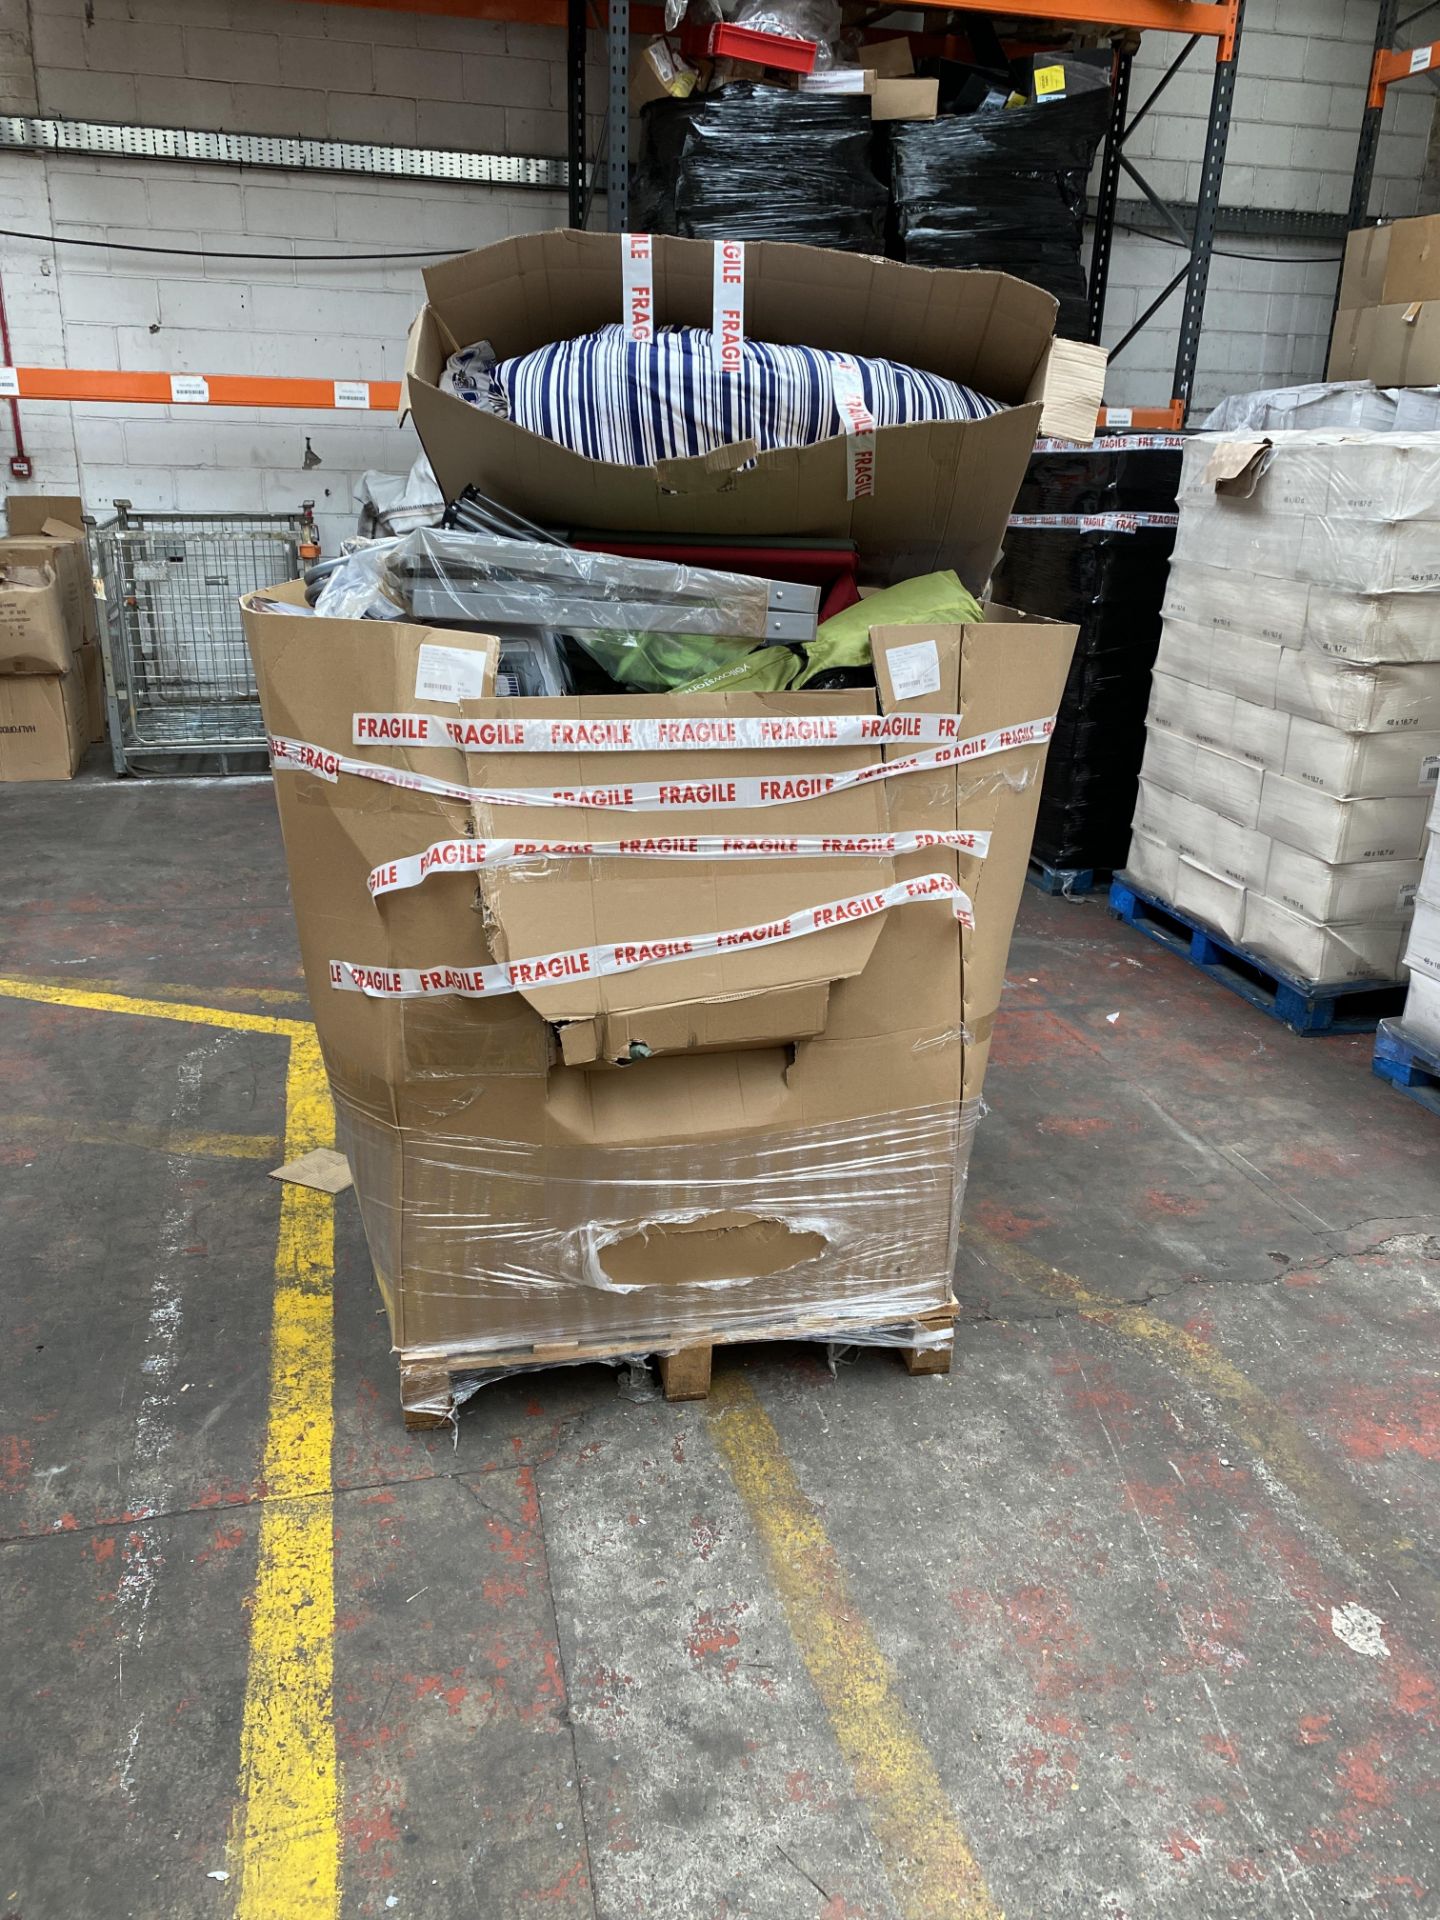 1 x Pallet of camping returns. Some brand new stock some returns. Pallet full of sleeping bags,